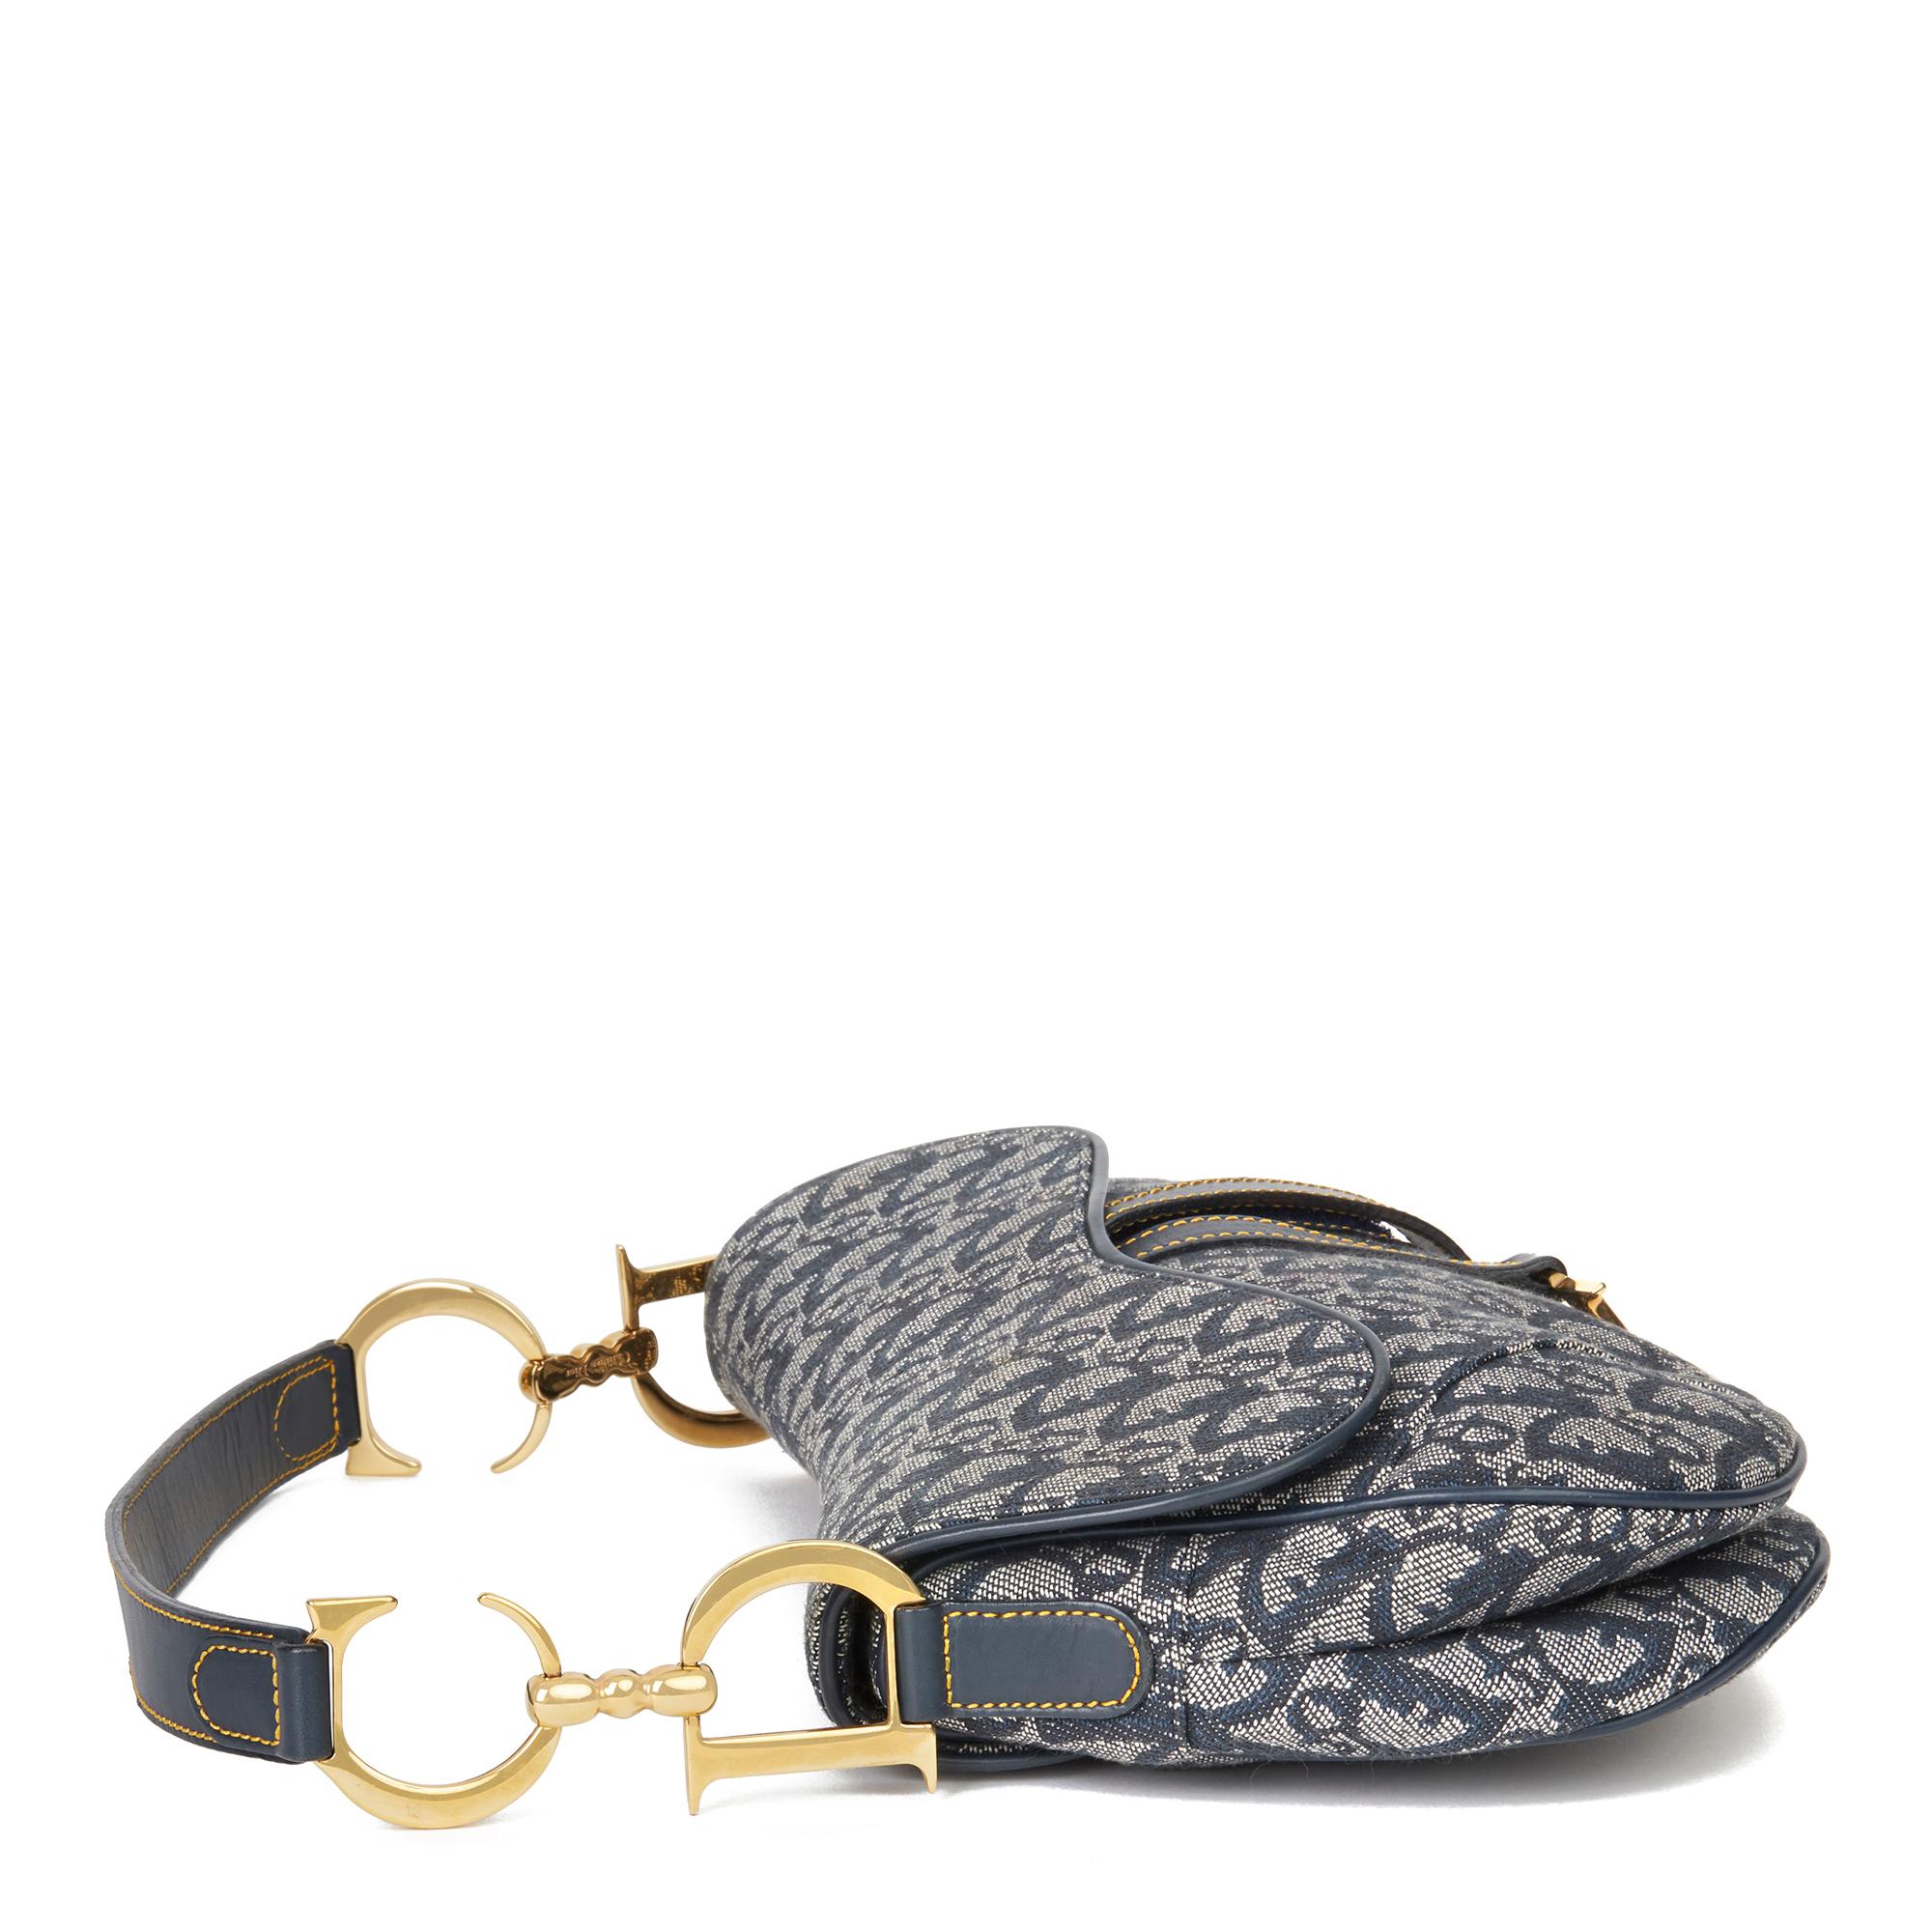 CHRISTIAN DIOR
Blue Monogram Canvas Saddle Bag

Xupes Reference: HB2992
Serial Number: RU0011
Age (Circa): 2001
Authenticity Details: Date Stamp (Made in Italy)
Gender: Ladies
Type: Top Handle, Shoulder

Colour: Blue
Hardware: Gold
Material(s):